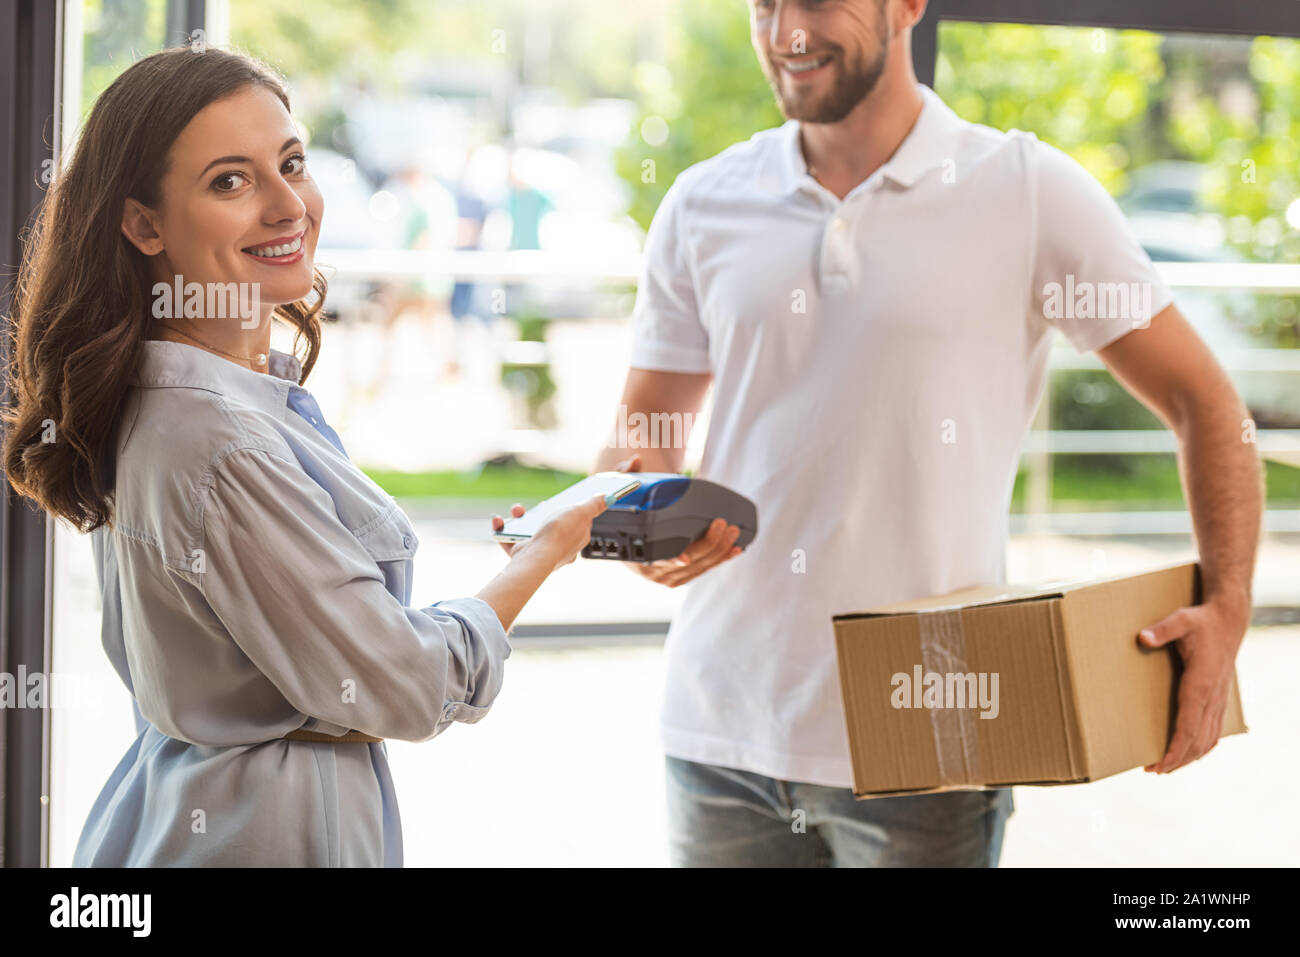 selective focus of happy woman paying while holding smartphone near credit card reader in hand on delivery man Stock Photo